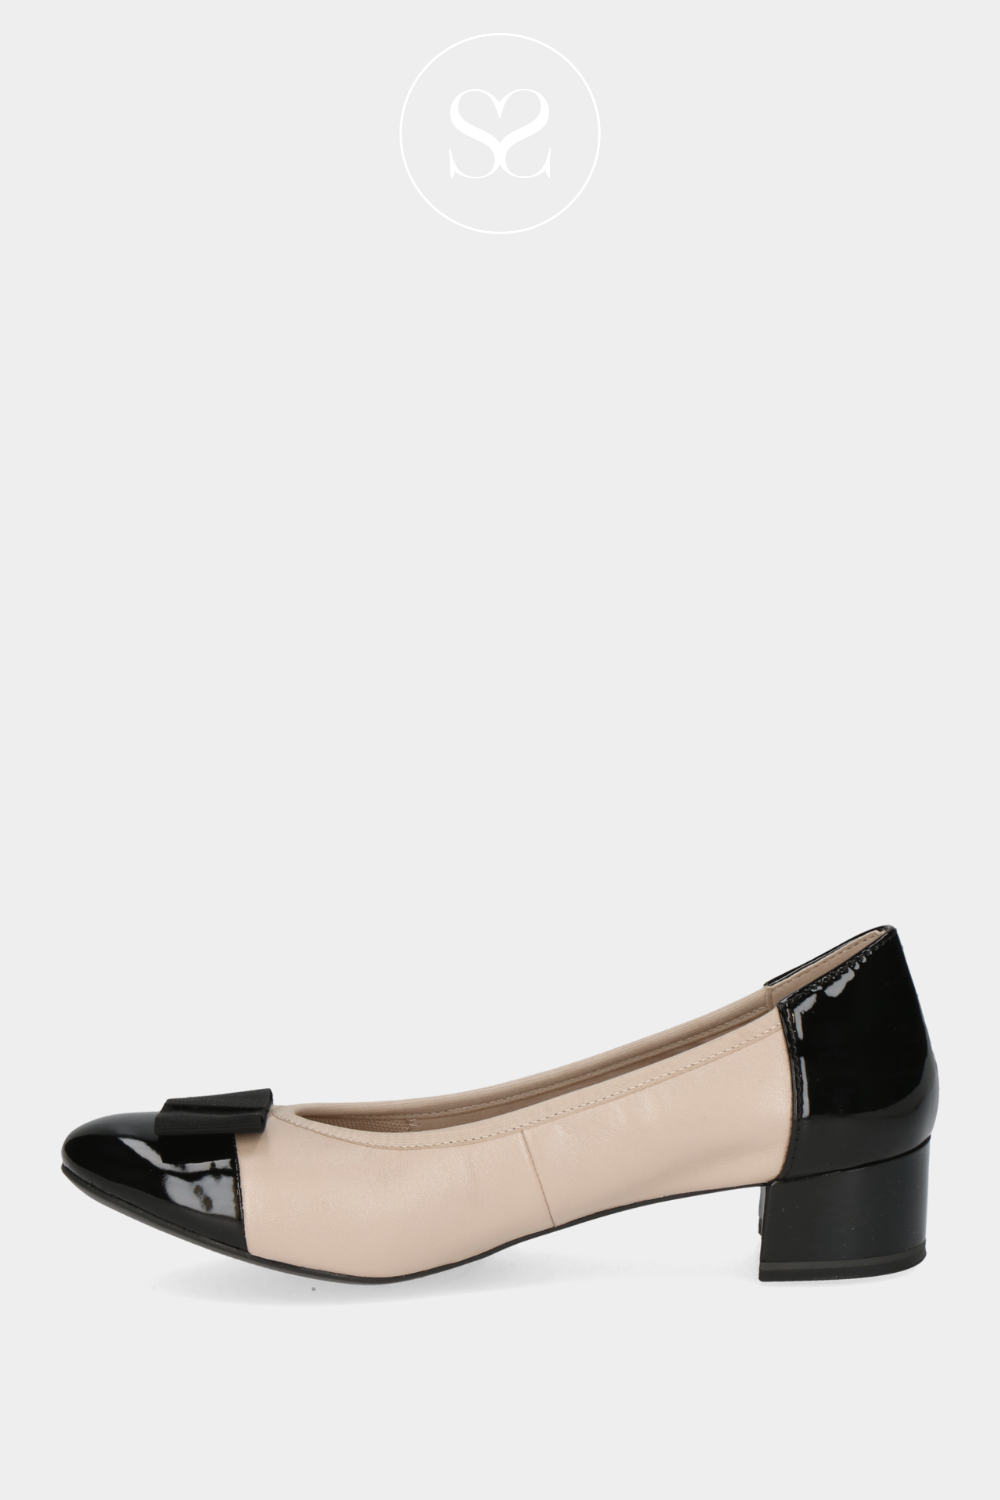 CAPRICE 9-22307-42 BLACK AND CREAM HEELED PUMP. LOW HEEL SHOE WITH BLACK BOW